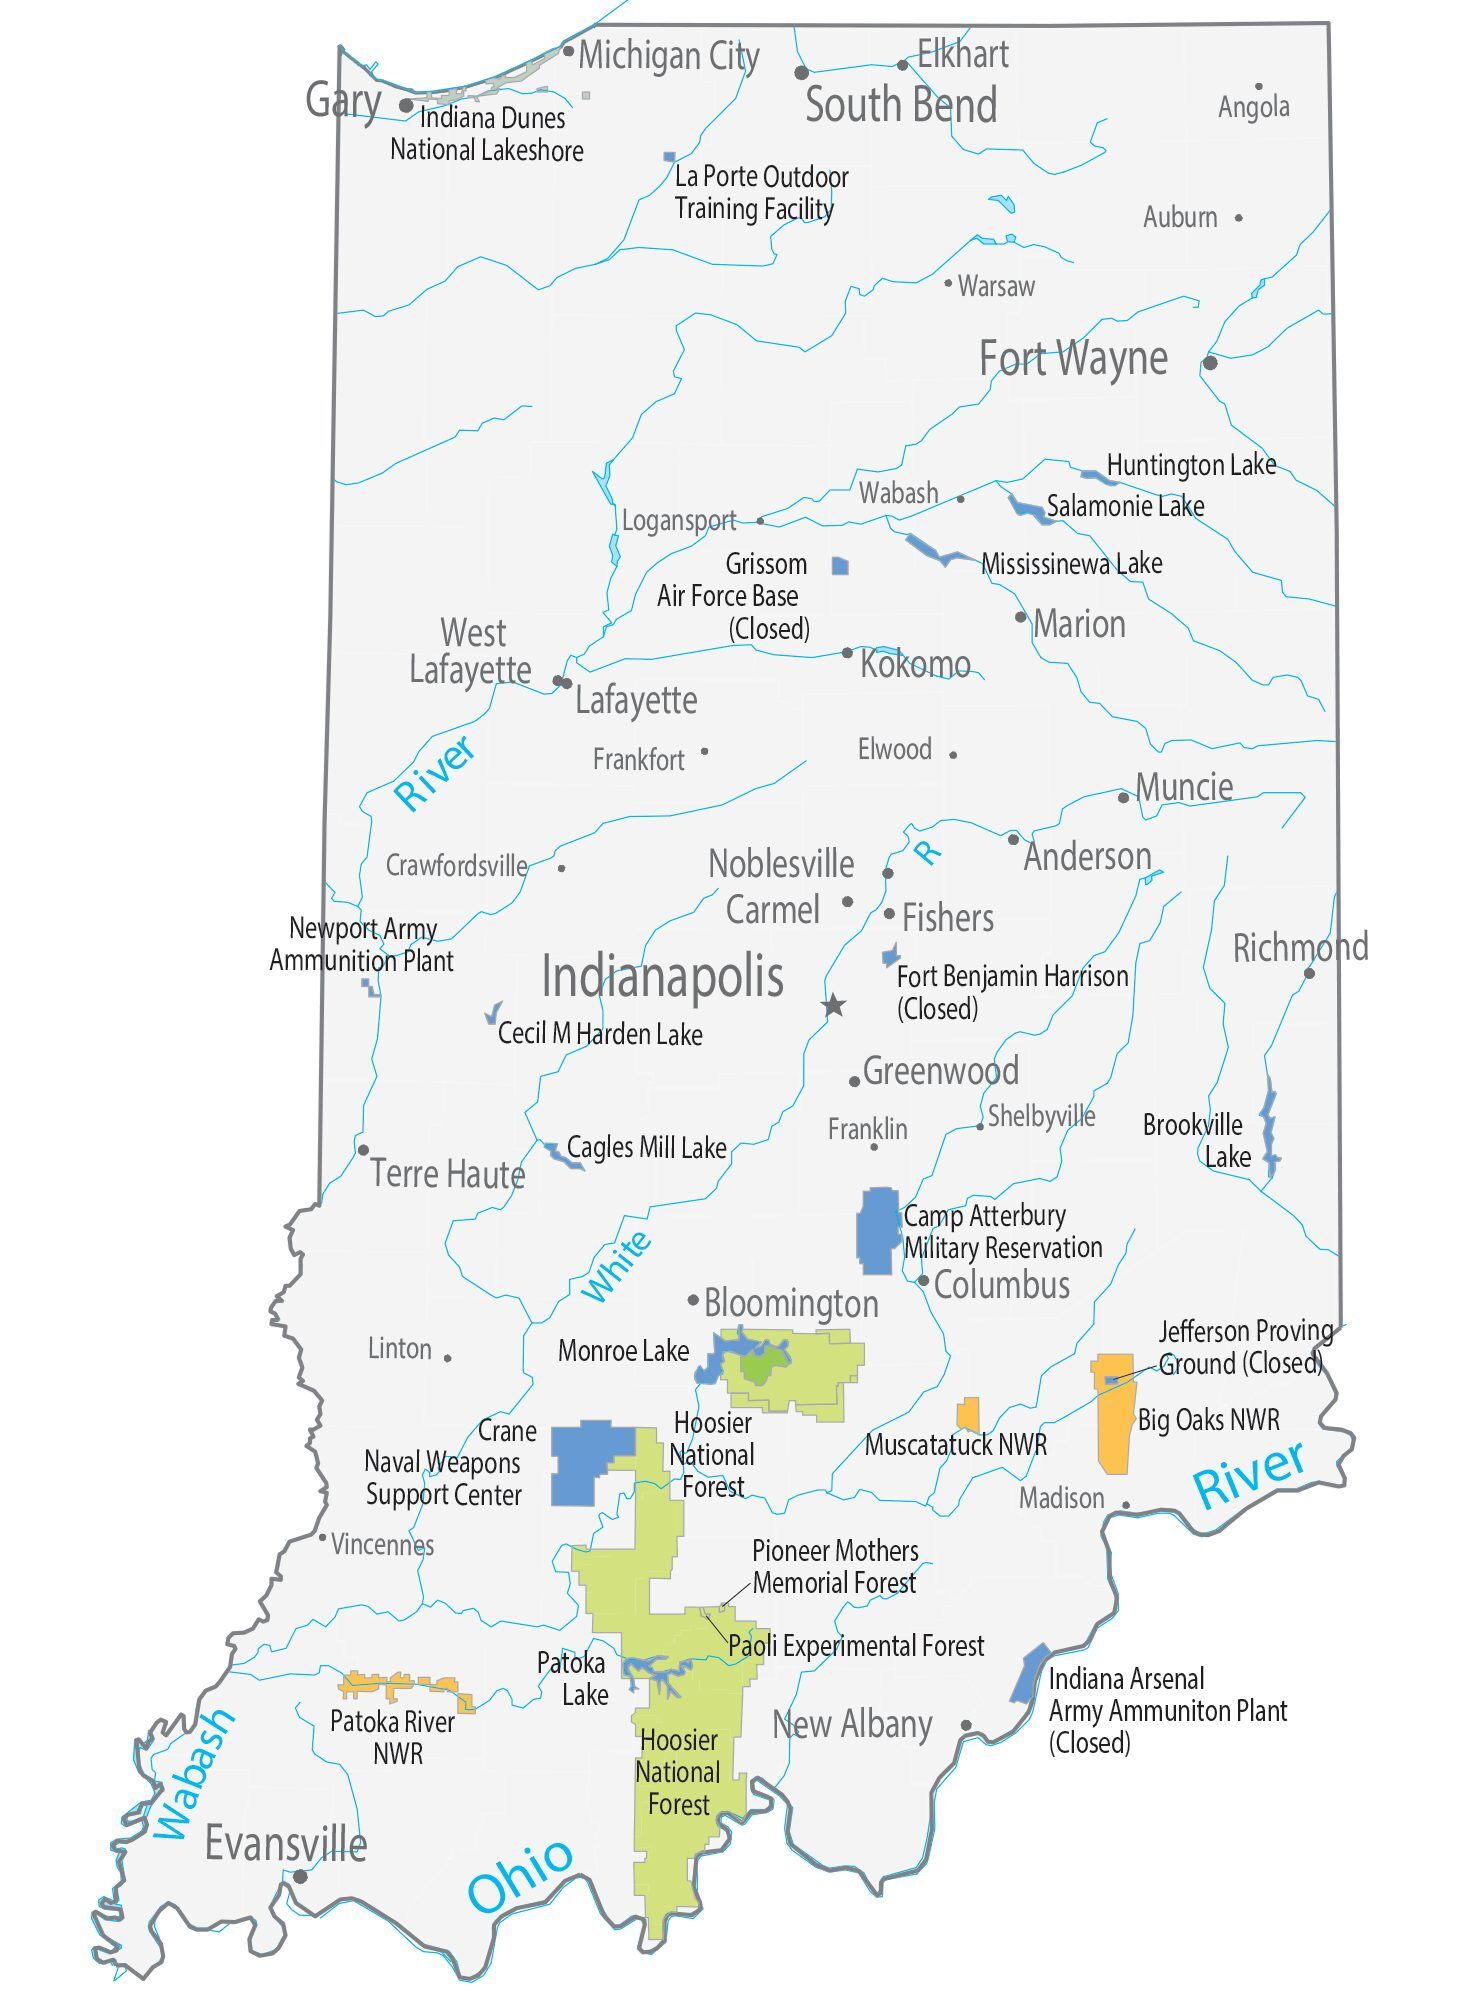 https://gisgeography.com/wp-content/uploads/2020/02/Indiana-State-Map.jpg